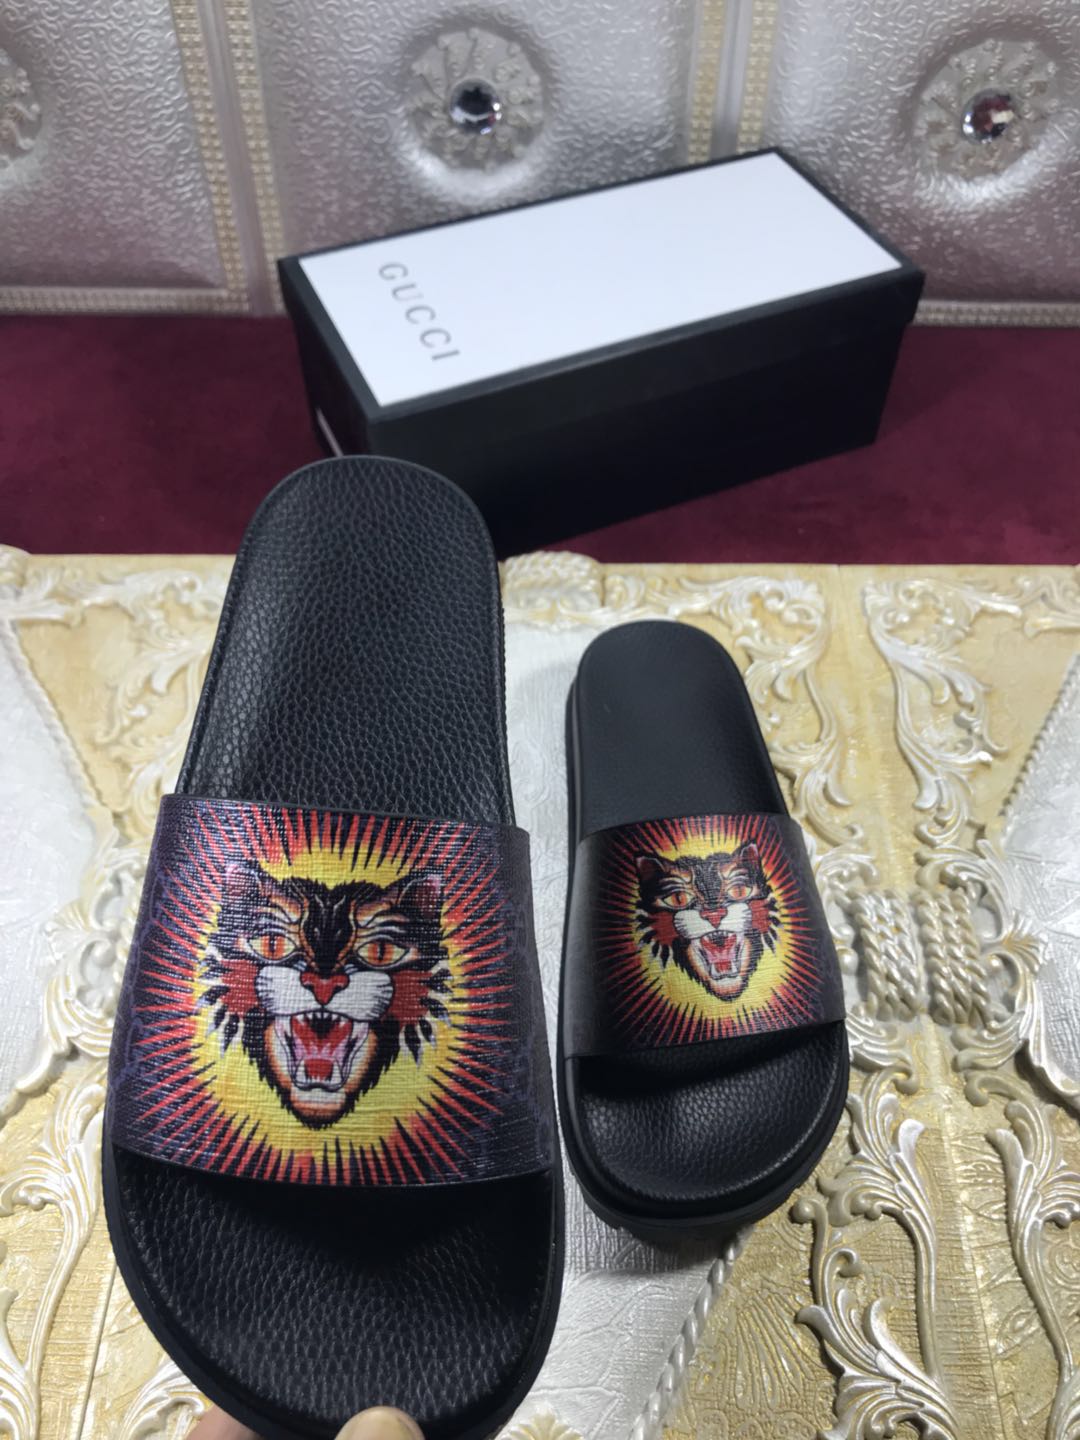 Gucci Slide Sandals with Angry Cat OF_2812F2F6C9E0